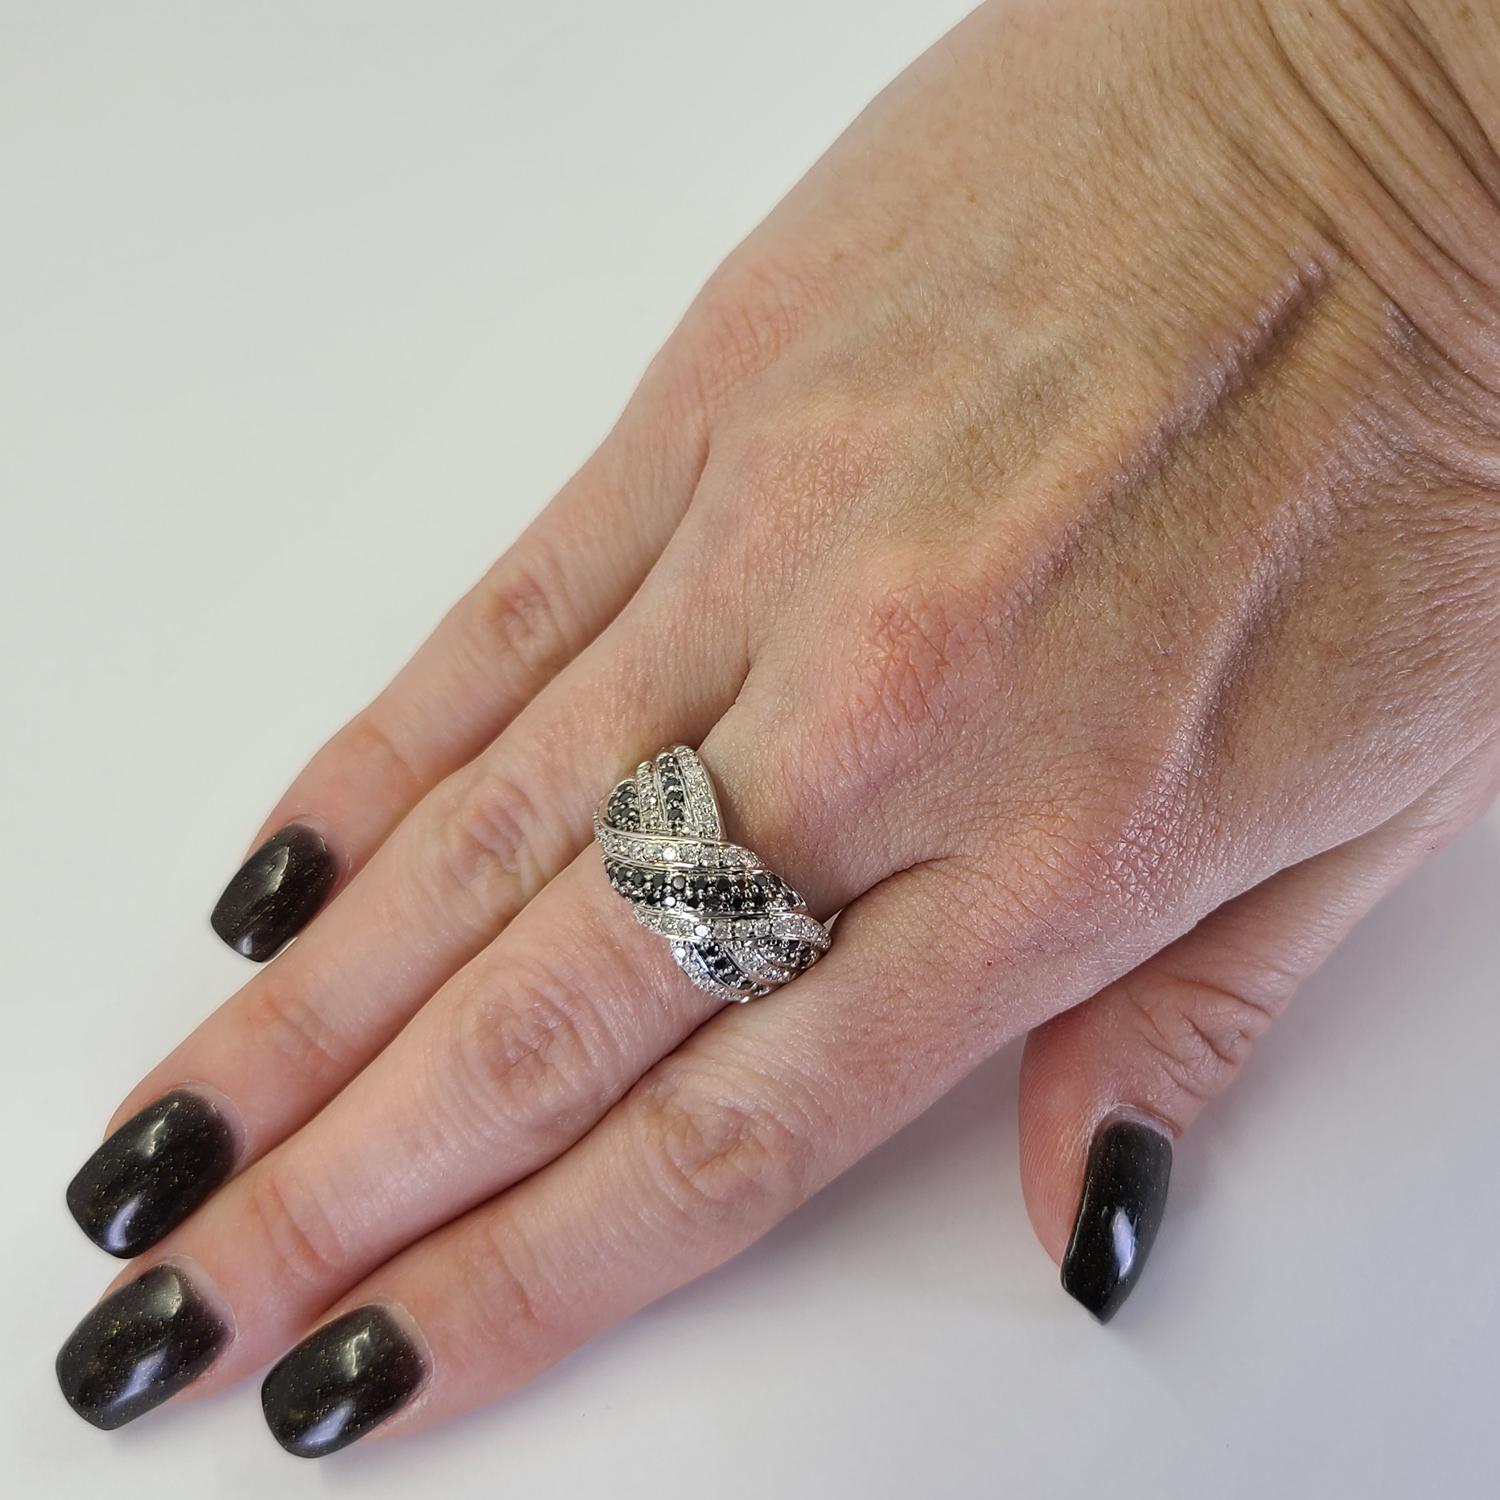 14 Karat White Gold Wide Ring Featuring Crossover X Design. 42 Black Diamonds Total Approximately 0.65 Carat, and 48 Round Diamonds Of I1 Clarity & H Color Total Approximately 0.50 Carats. Finger Size 7.25; Purchase Includes One Sizing Service.